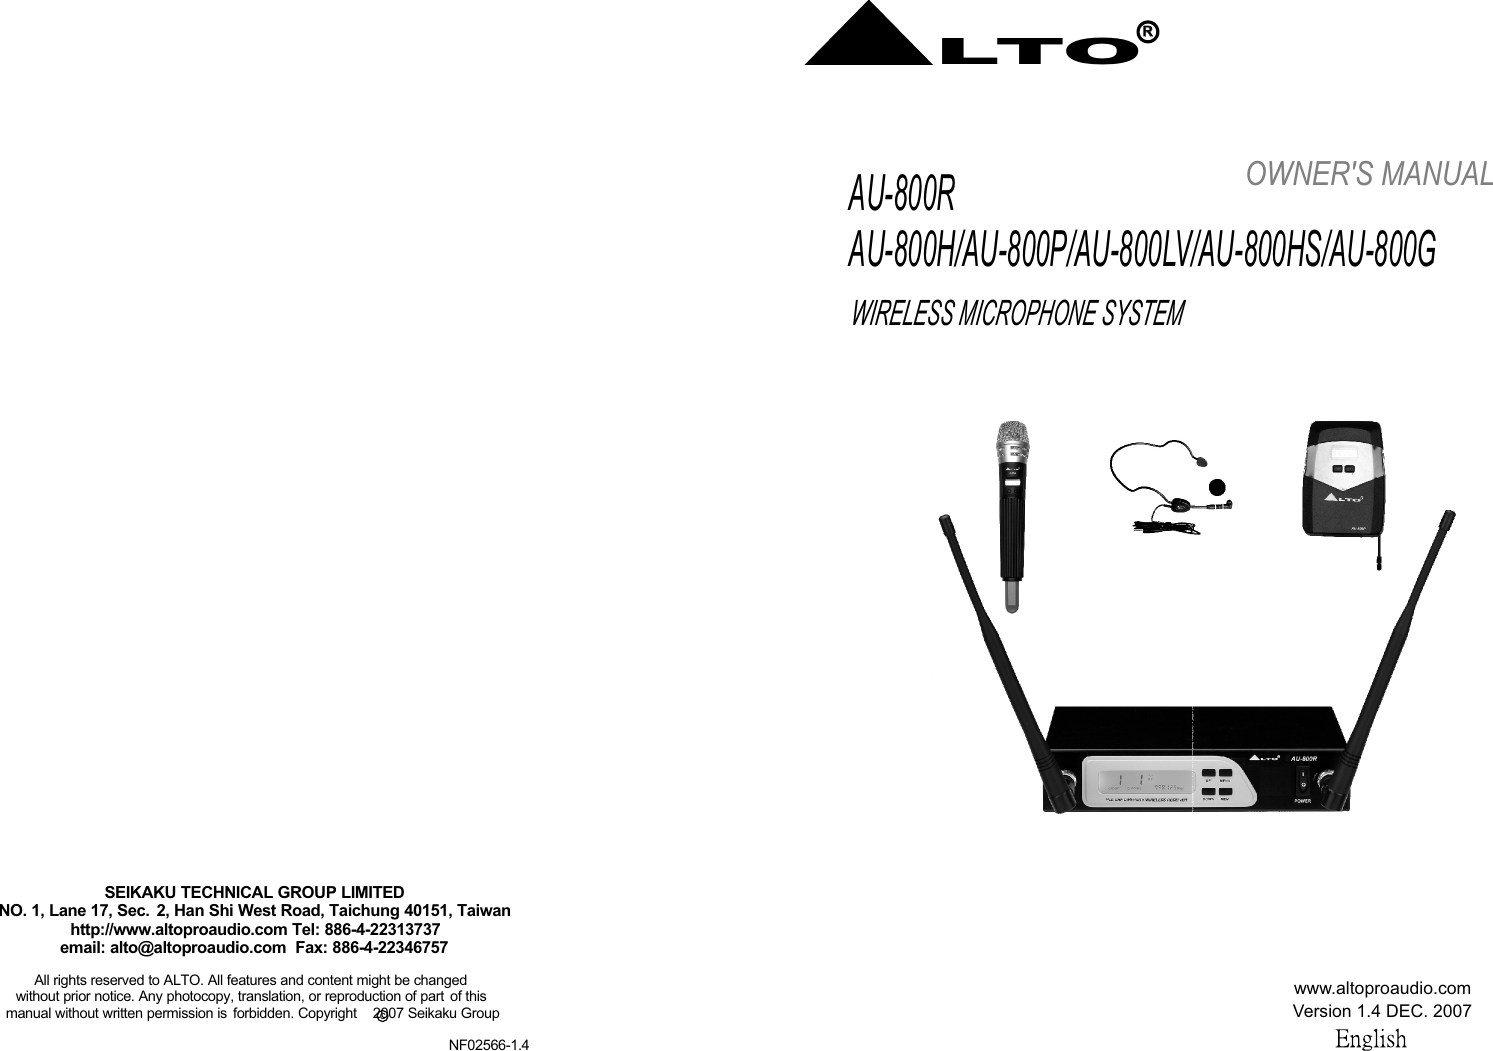 WIRELESS MICROPHONE SYSTEMAU-800RAU-800H/AU-800P/AU-800LV/AU-800HS/AU-800GOWNER&apos;S MANUAL www.altoproaudio.comVersion 1.4 DEC. 2007LTORRcAll rights reserved to ALTO. All features and content might be changed without prior notice. Any photocopy, translation, or reproduction of part  of this  manual without written permission is  forbidden. Copyright    2007 Seikaku Group   SEIKAKU TECHNICAL GROUP LIMITEDNO. 1, Lane 17, Sec.  2, Han Shi West Road, Taichung 40151, Taiwanhttp://www.altoproaudio.com Tel: 886-4-22313737email: alto@altoproaudio.com  Fax: 886-4-22346757HM-38LTORNF02566-1.4